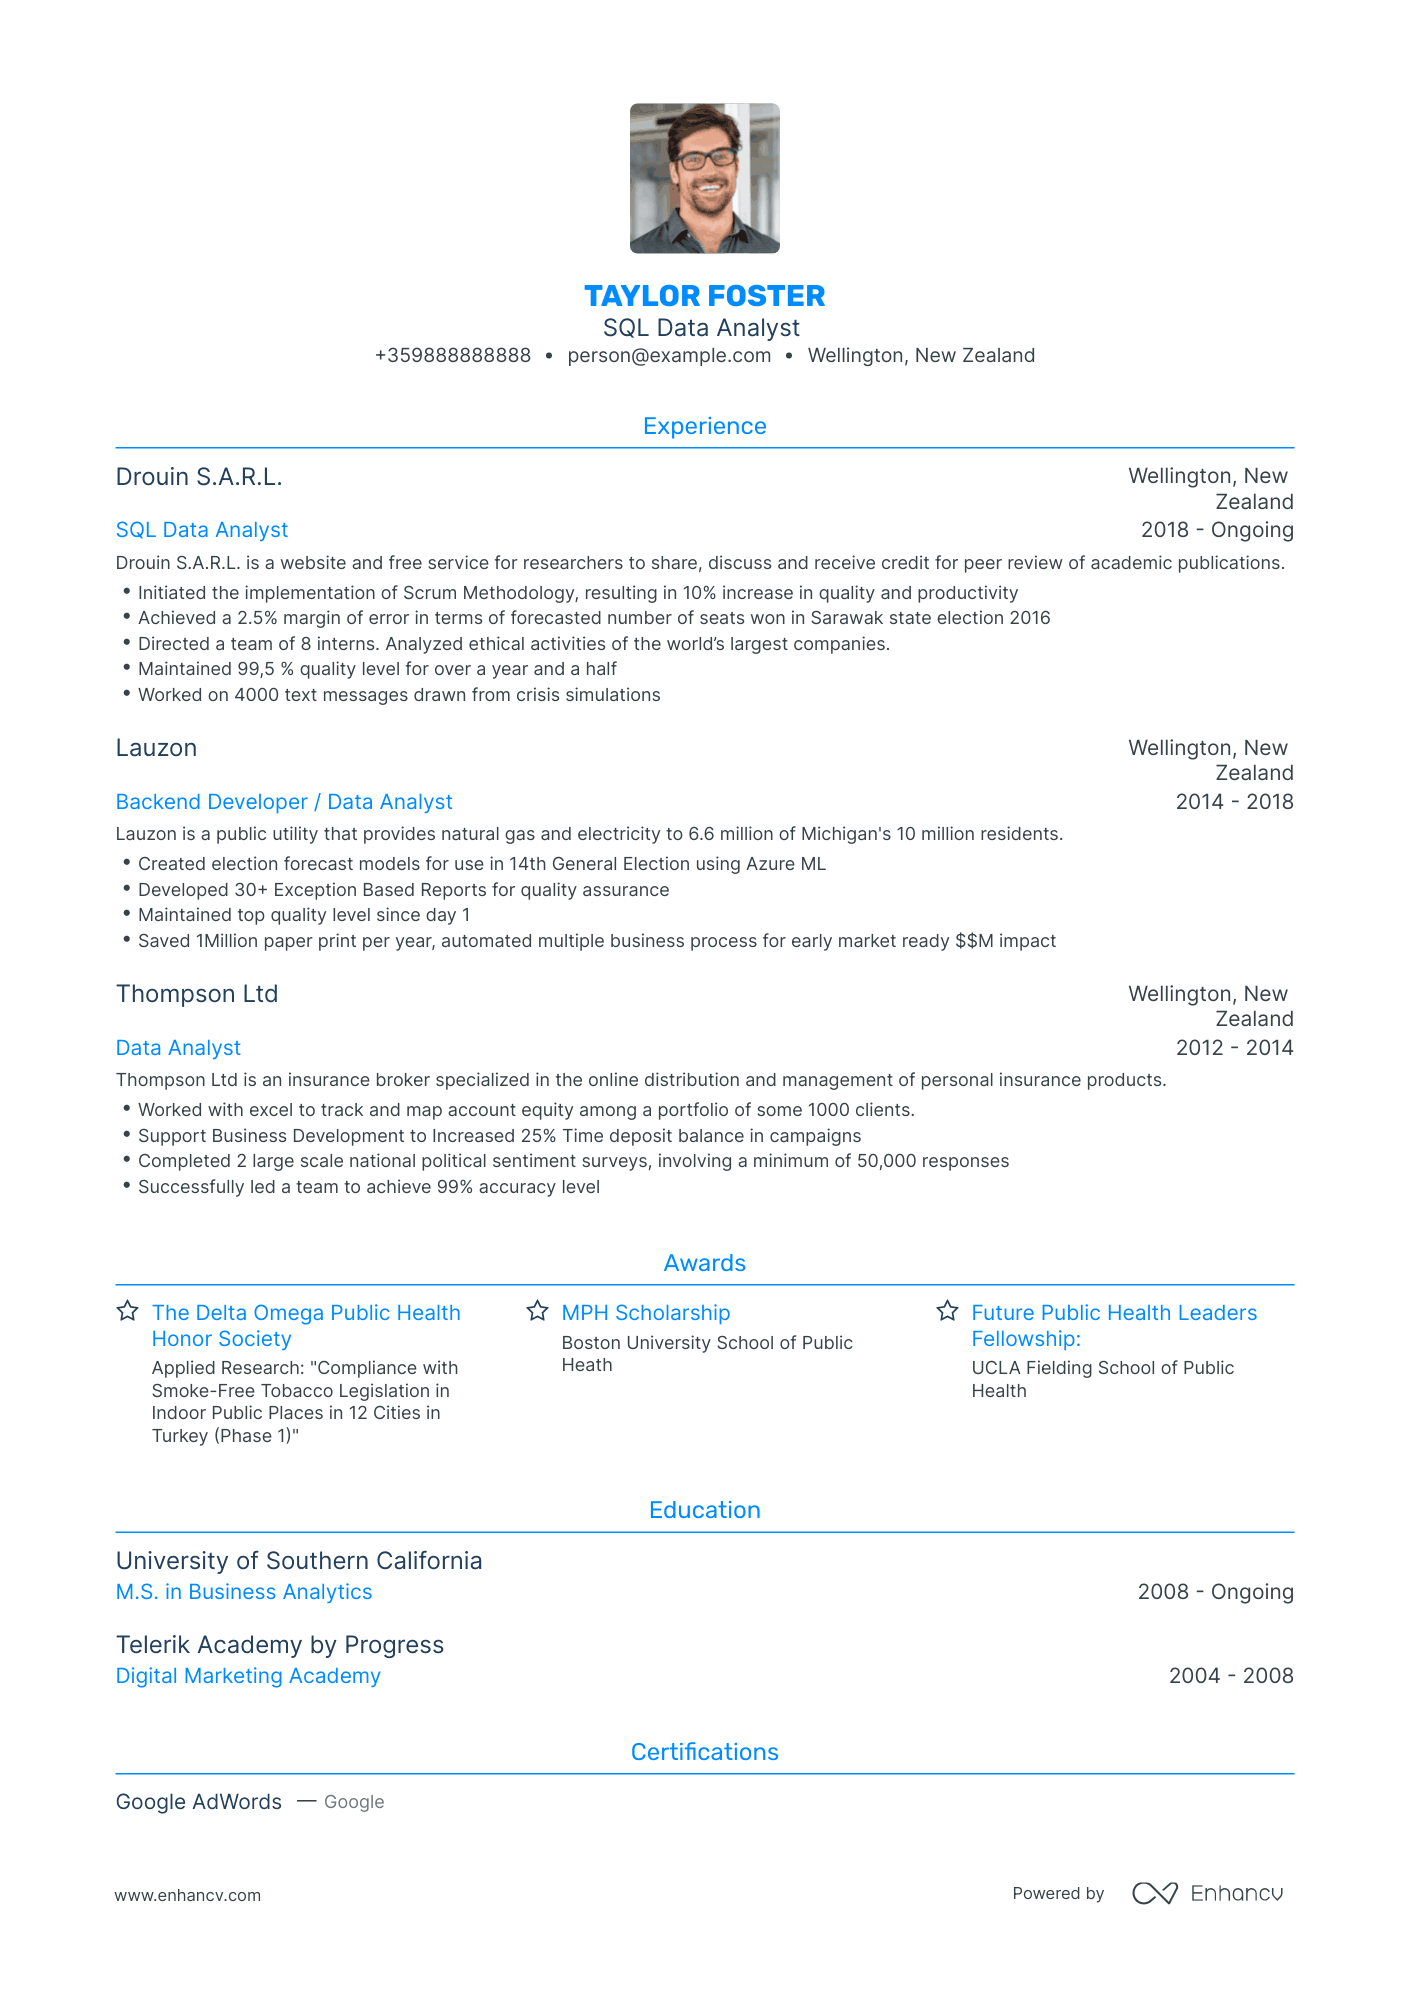 Traditional SQL Data Analyst Resume Template